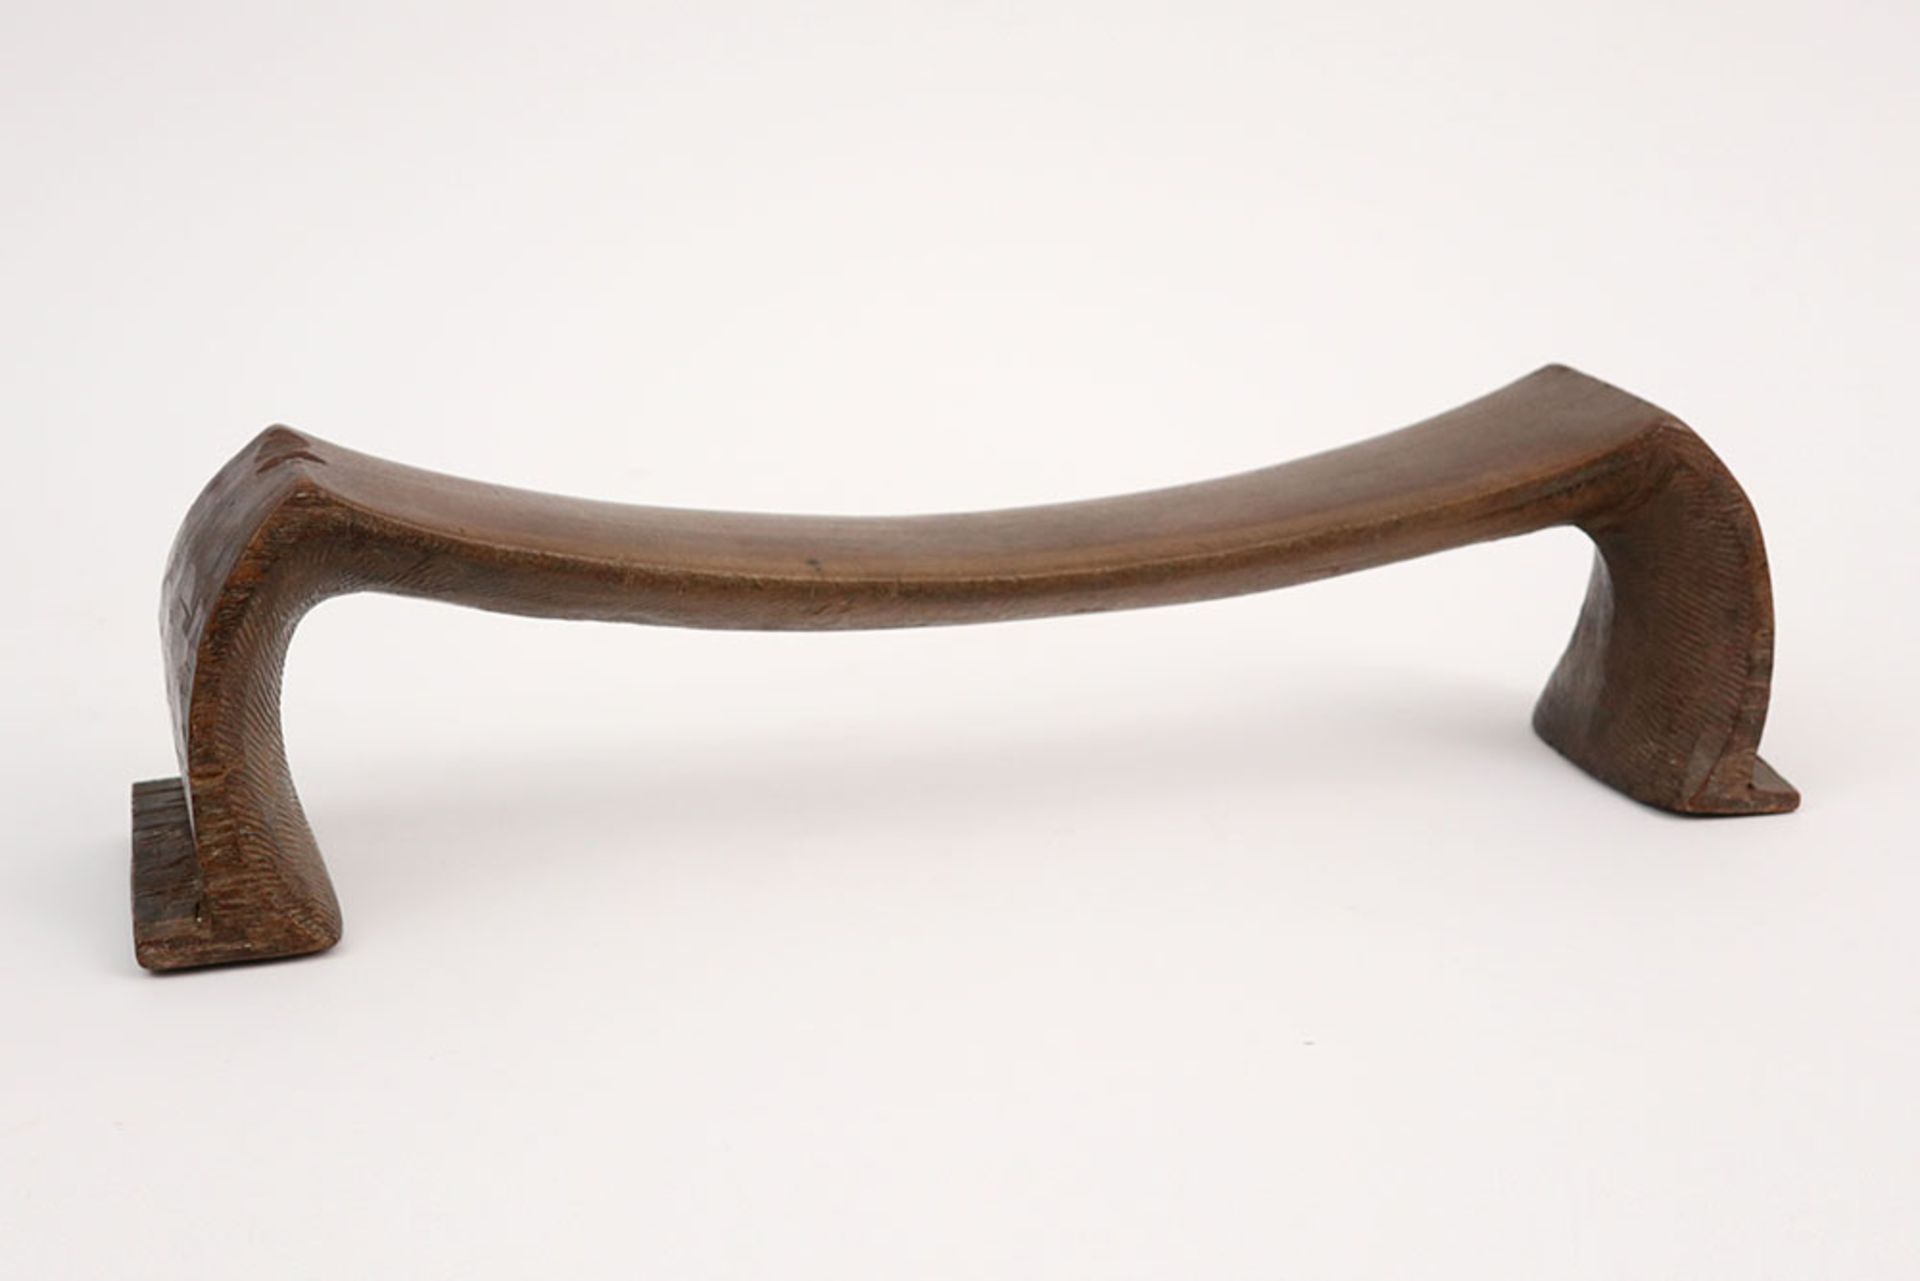 19th Cent. Polynesian Tonga Islands headrest with characteristic M shape in wood || POLYNESIË -